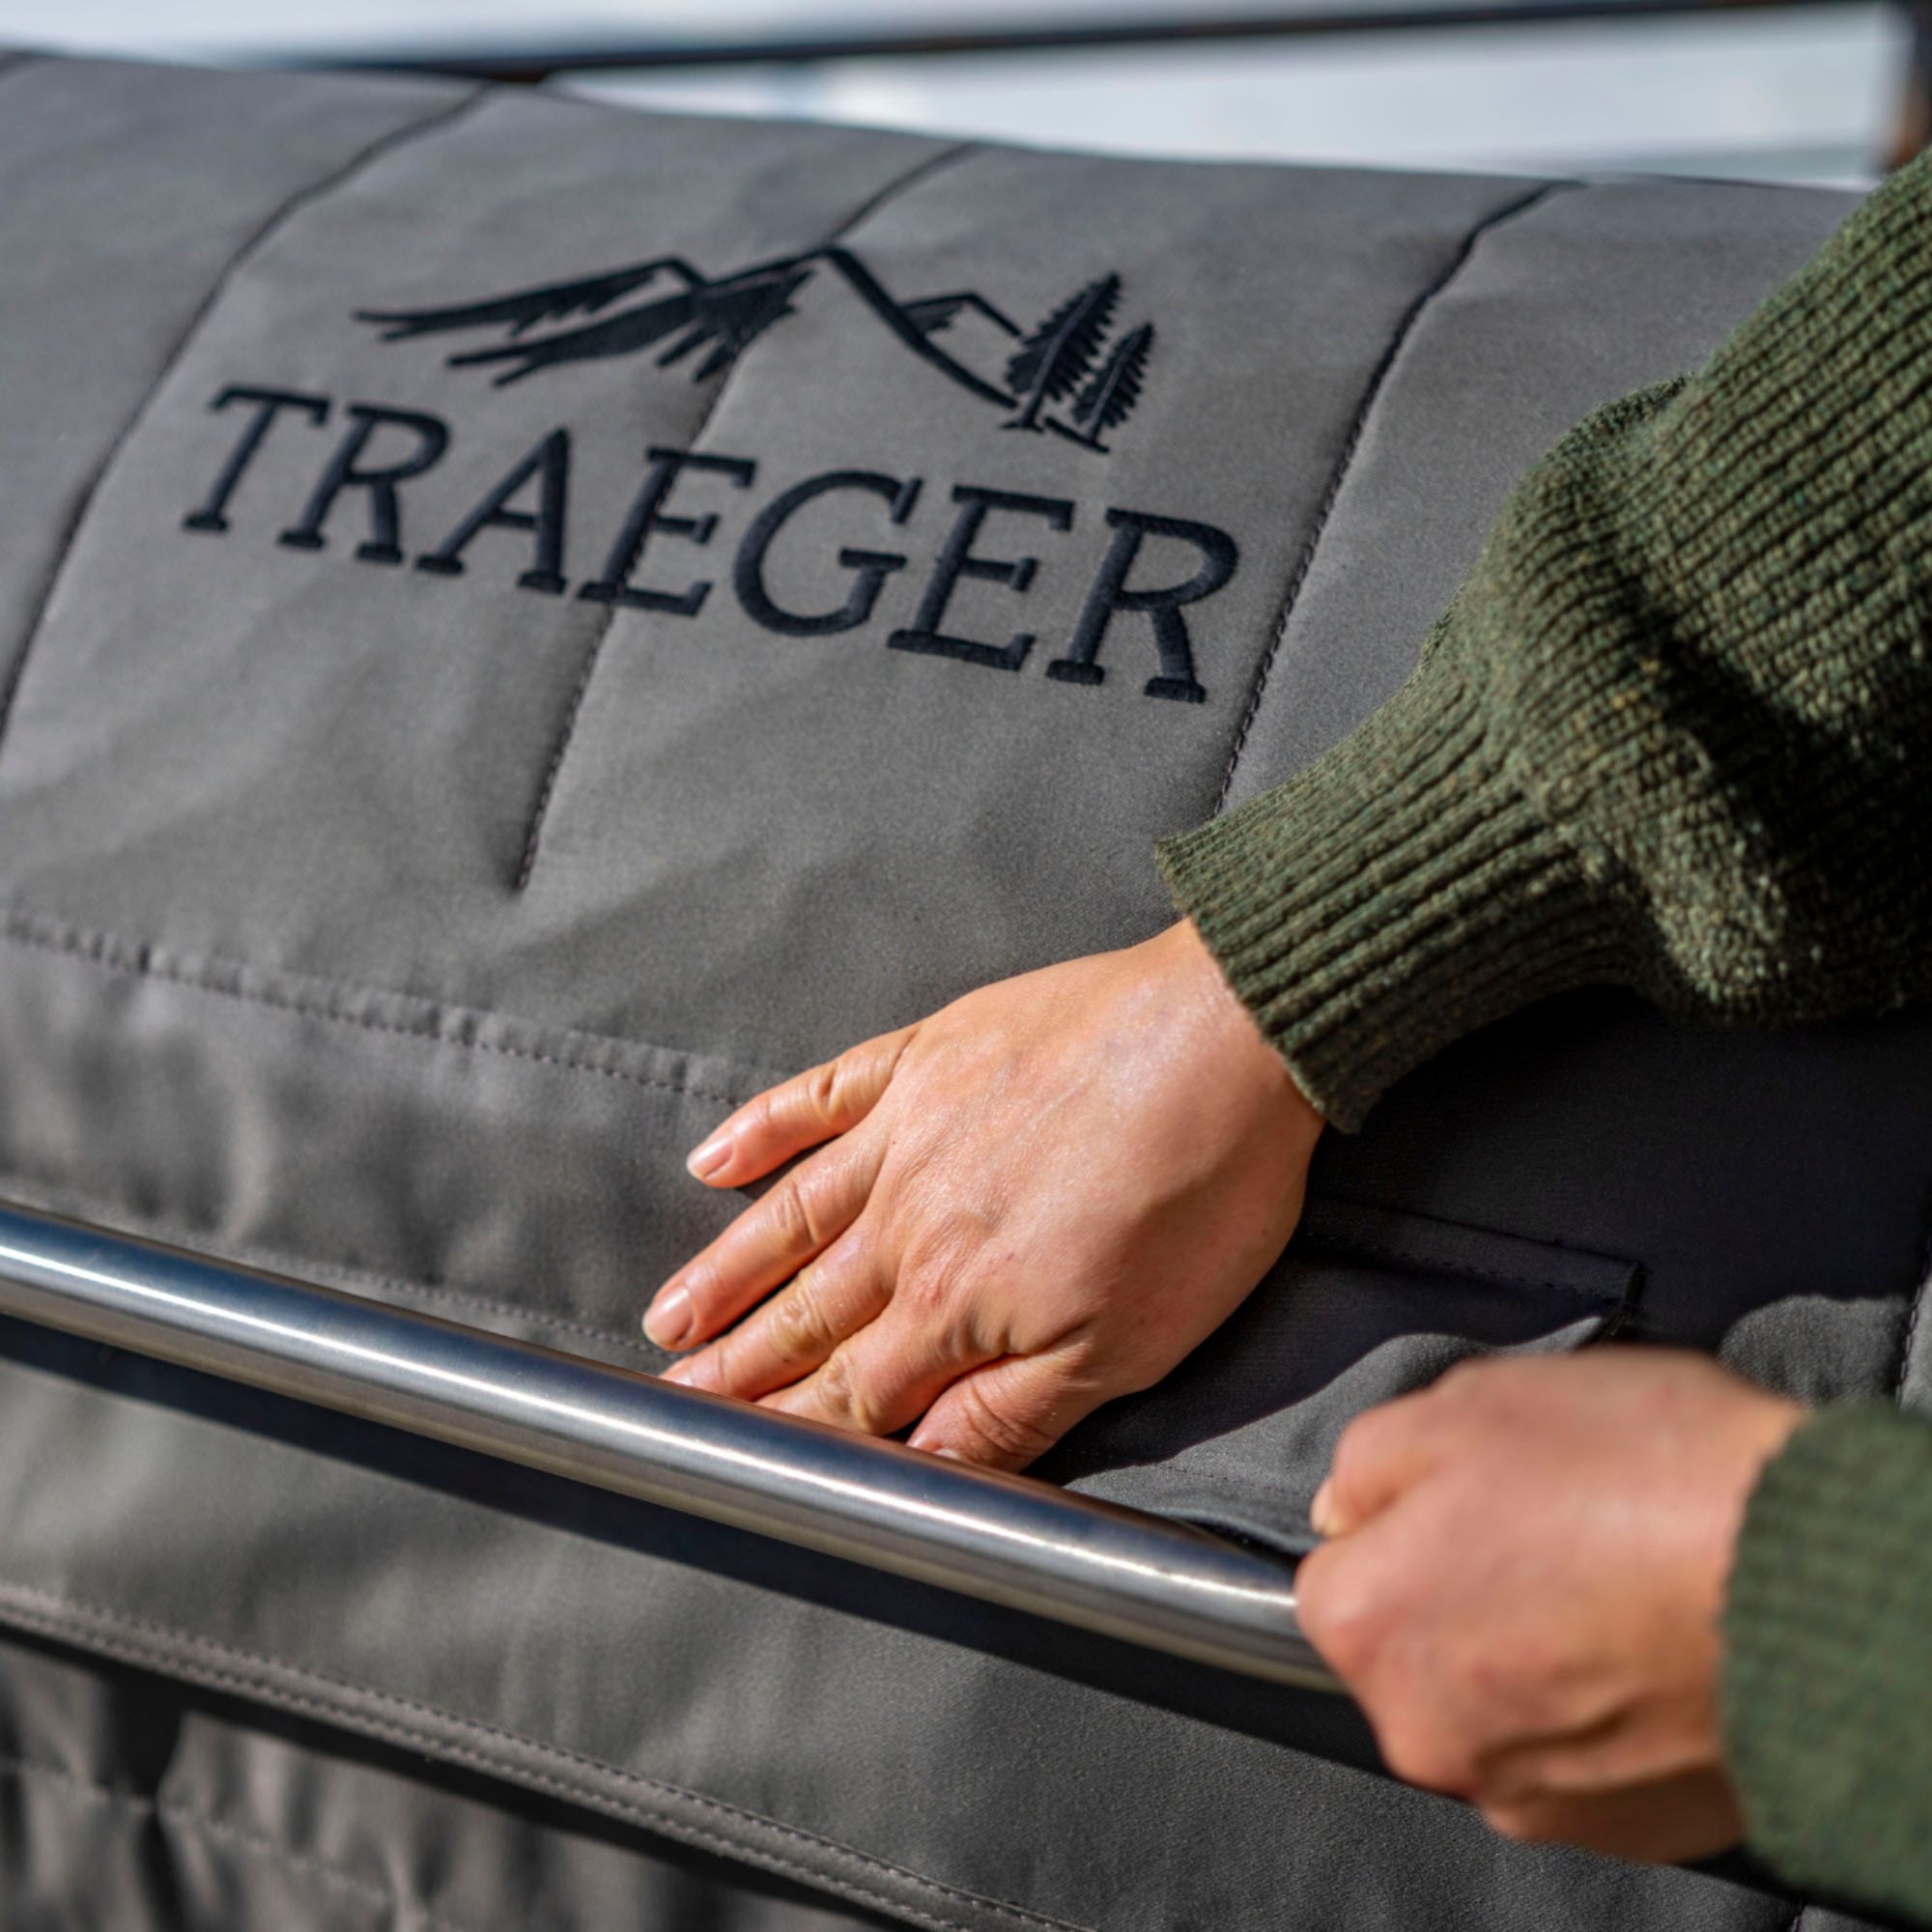 Traeger Grills Traeger Insulation Blanket - Pro 34 by Traeger Grills